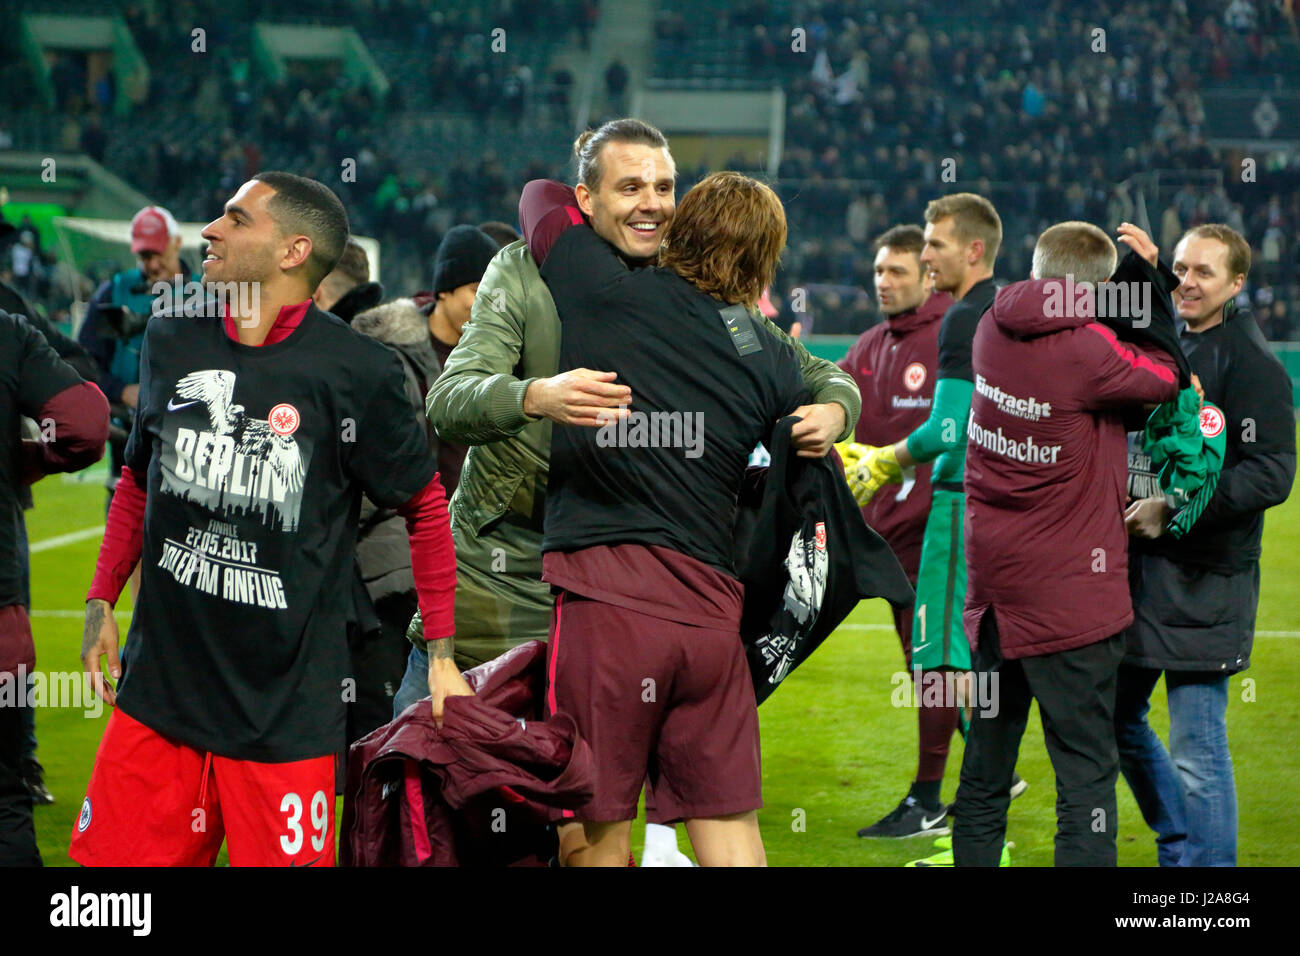 sports, football, DFB Cup, 2016/2017, Round 5, semifinal, Borussia Moenchengladbach vs Eintracht Frankfurt 7:8 on penalties, Stadium Borussia Park, Frankfurt players rejoicing at the win and the entry to the DFB Cup final 2017 in Berlin, Omar Mascarell (Frankfurt) left and the injured Alexander Meier (Frankfurt) in civvies Stock Photo